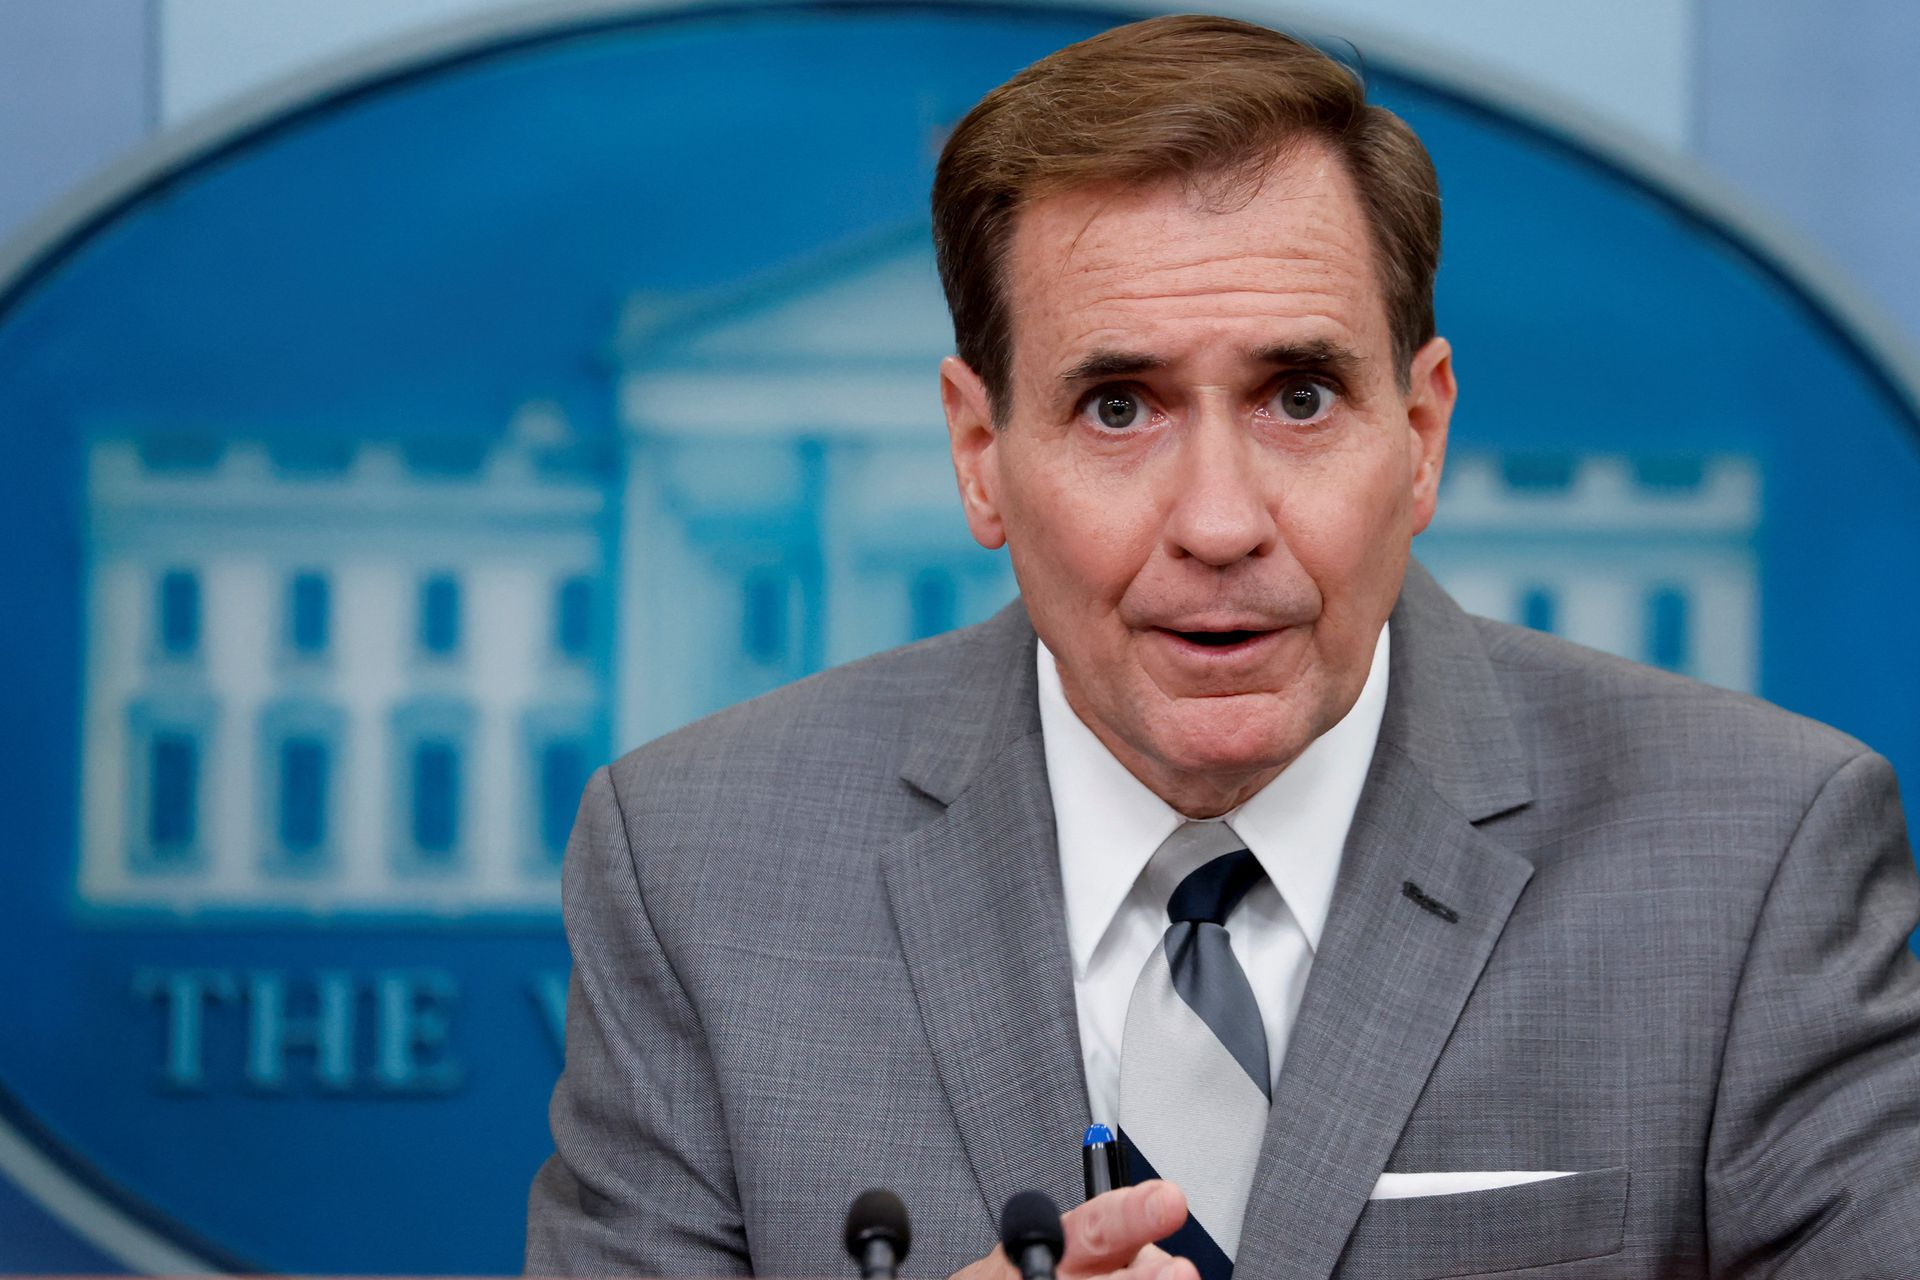 White House National Security Council Strategic Communications Coordinator John Kirby addressing the press briefing